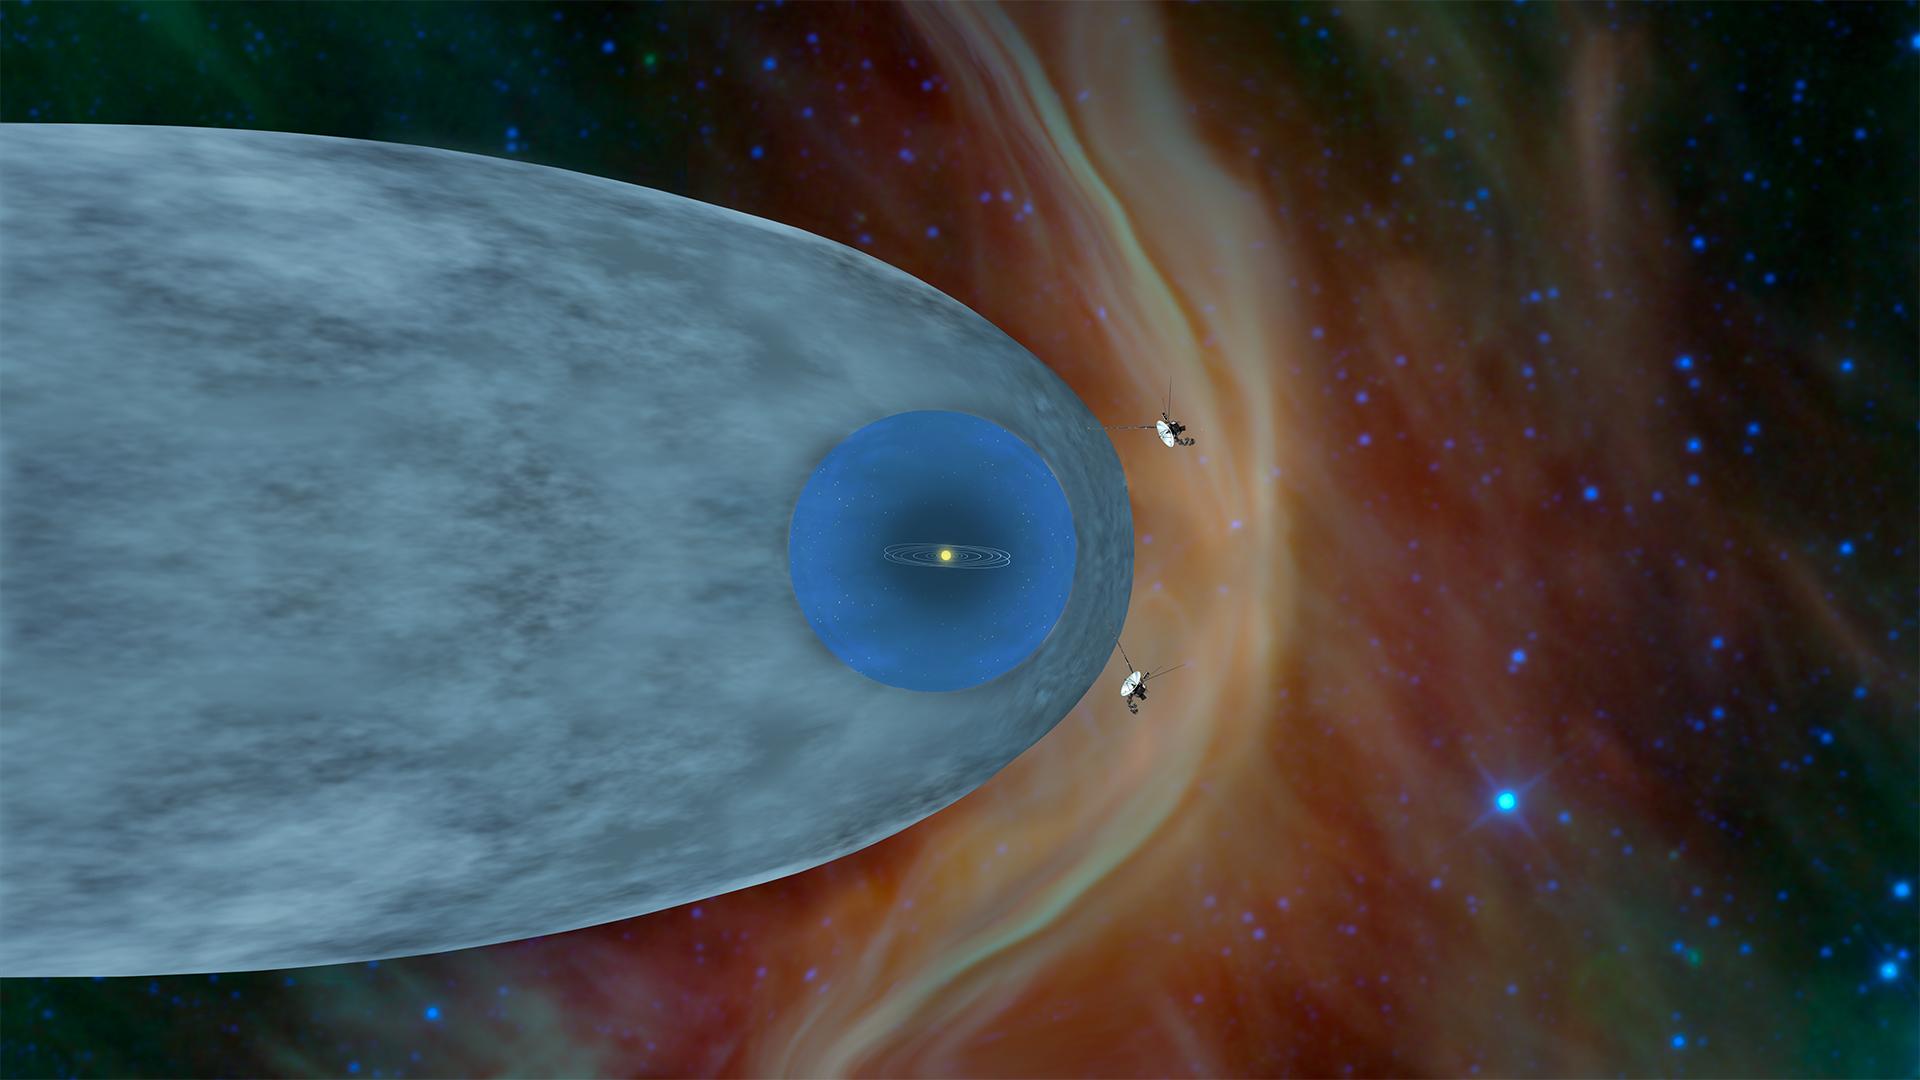 NASA's Voyager 2 Probe Enters Interstellar Space This illustration shows the position of NASA's Voyager 1 and Voyager 2 probes, outside of the heliosphere, a protective bubble created by the Sun that extends well past the orbit of Pluto. Voyager 1 exited the heliosphere in August 2012. Voyager 2 exited at a different location in November 2018. Credit: NASA/JPL-Caltech